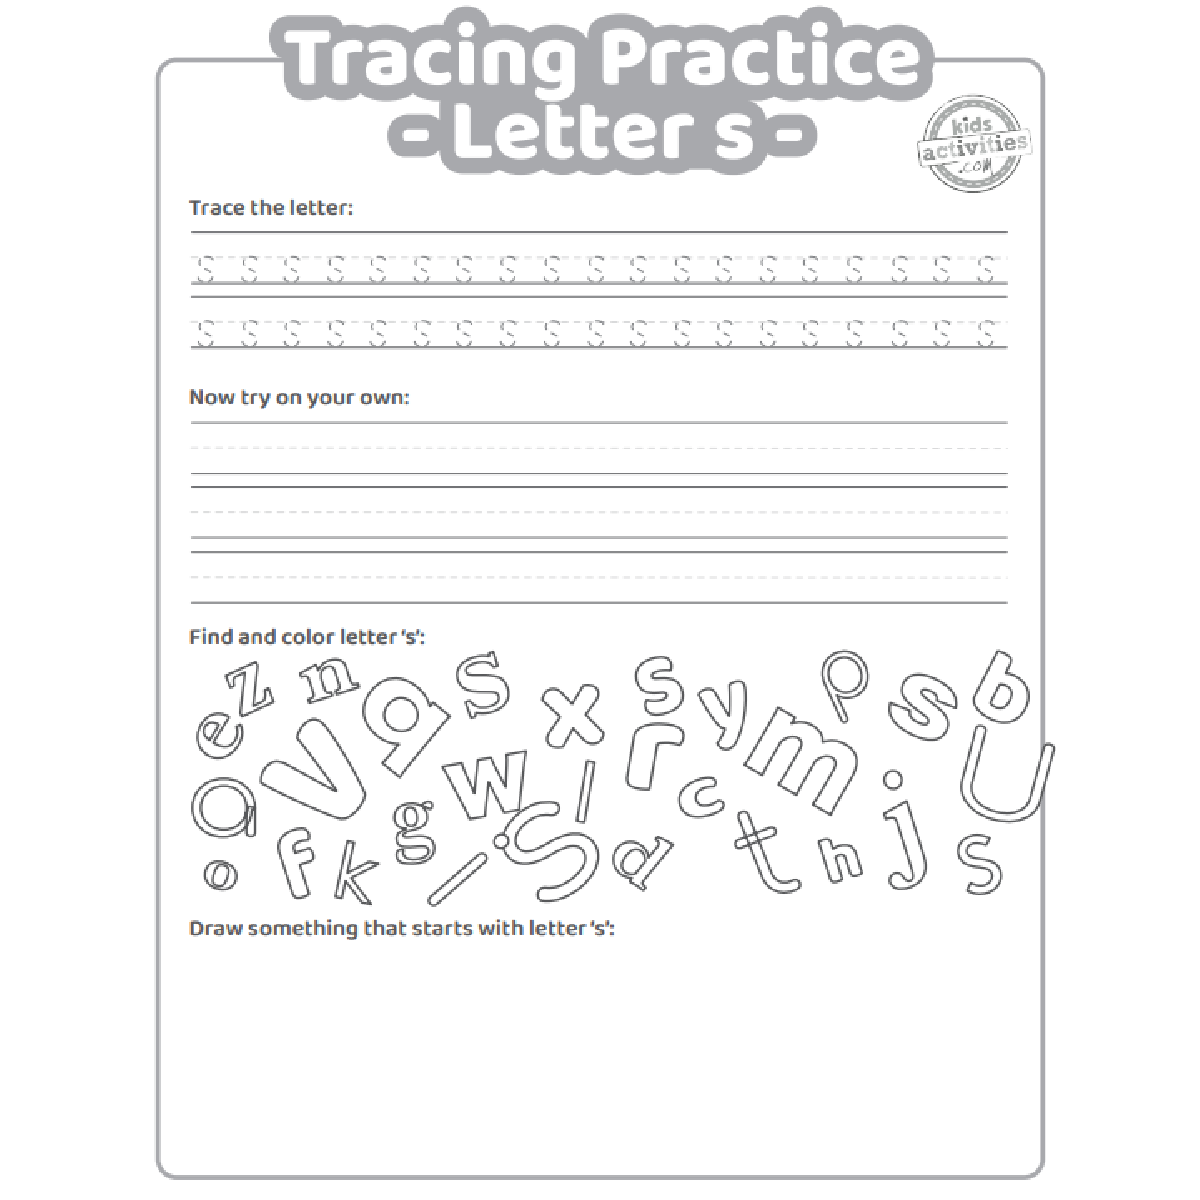 Free letter s practice worksheet trace it write it find it draw kids activities blog